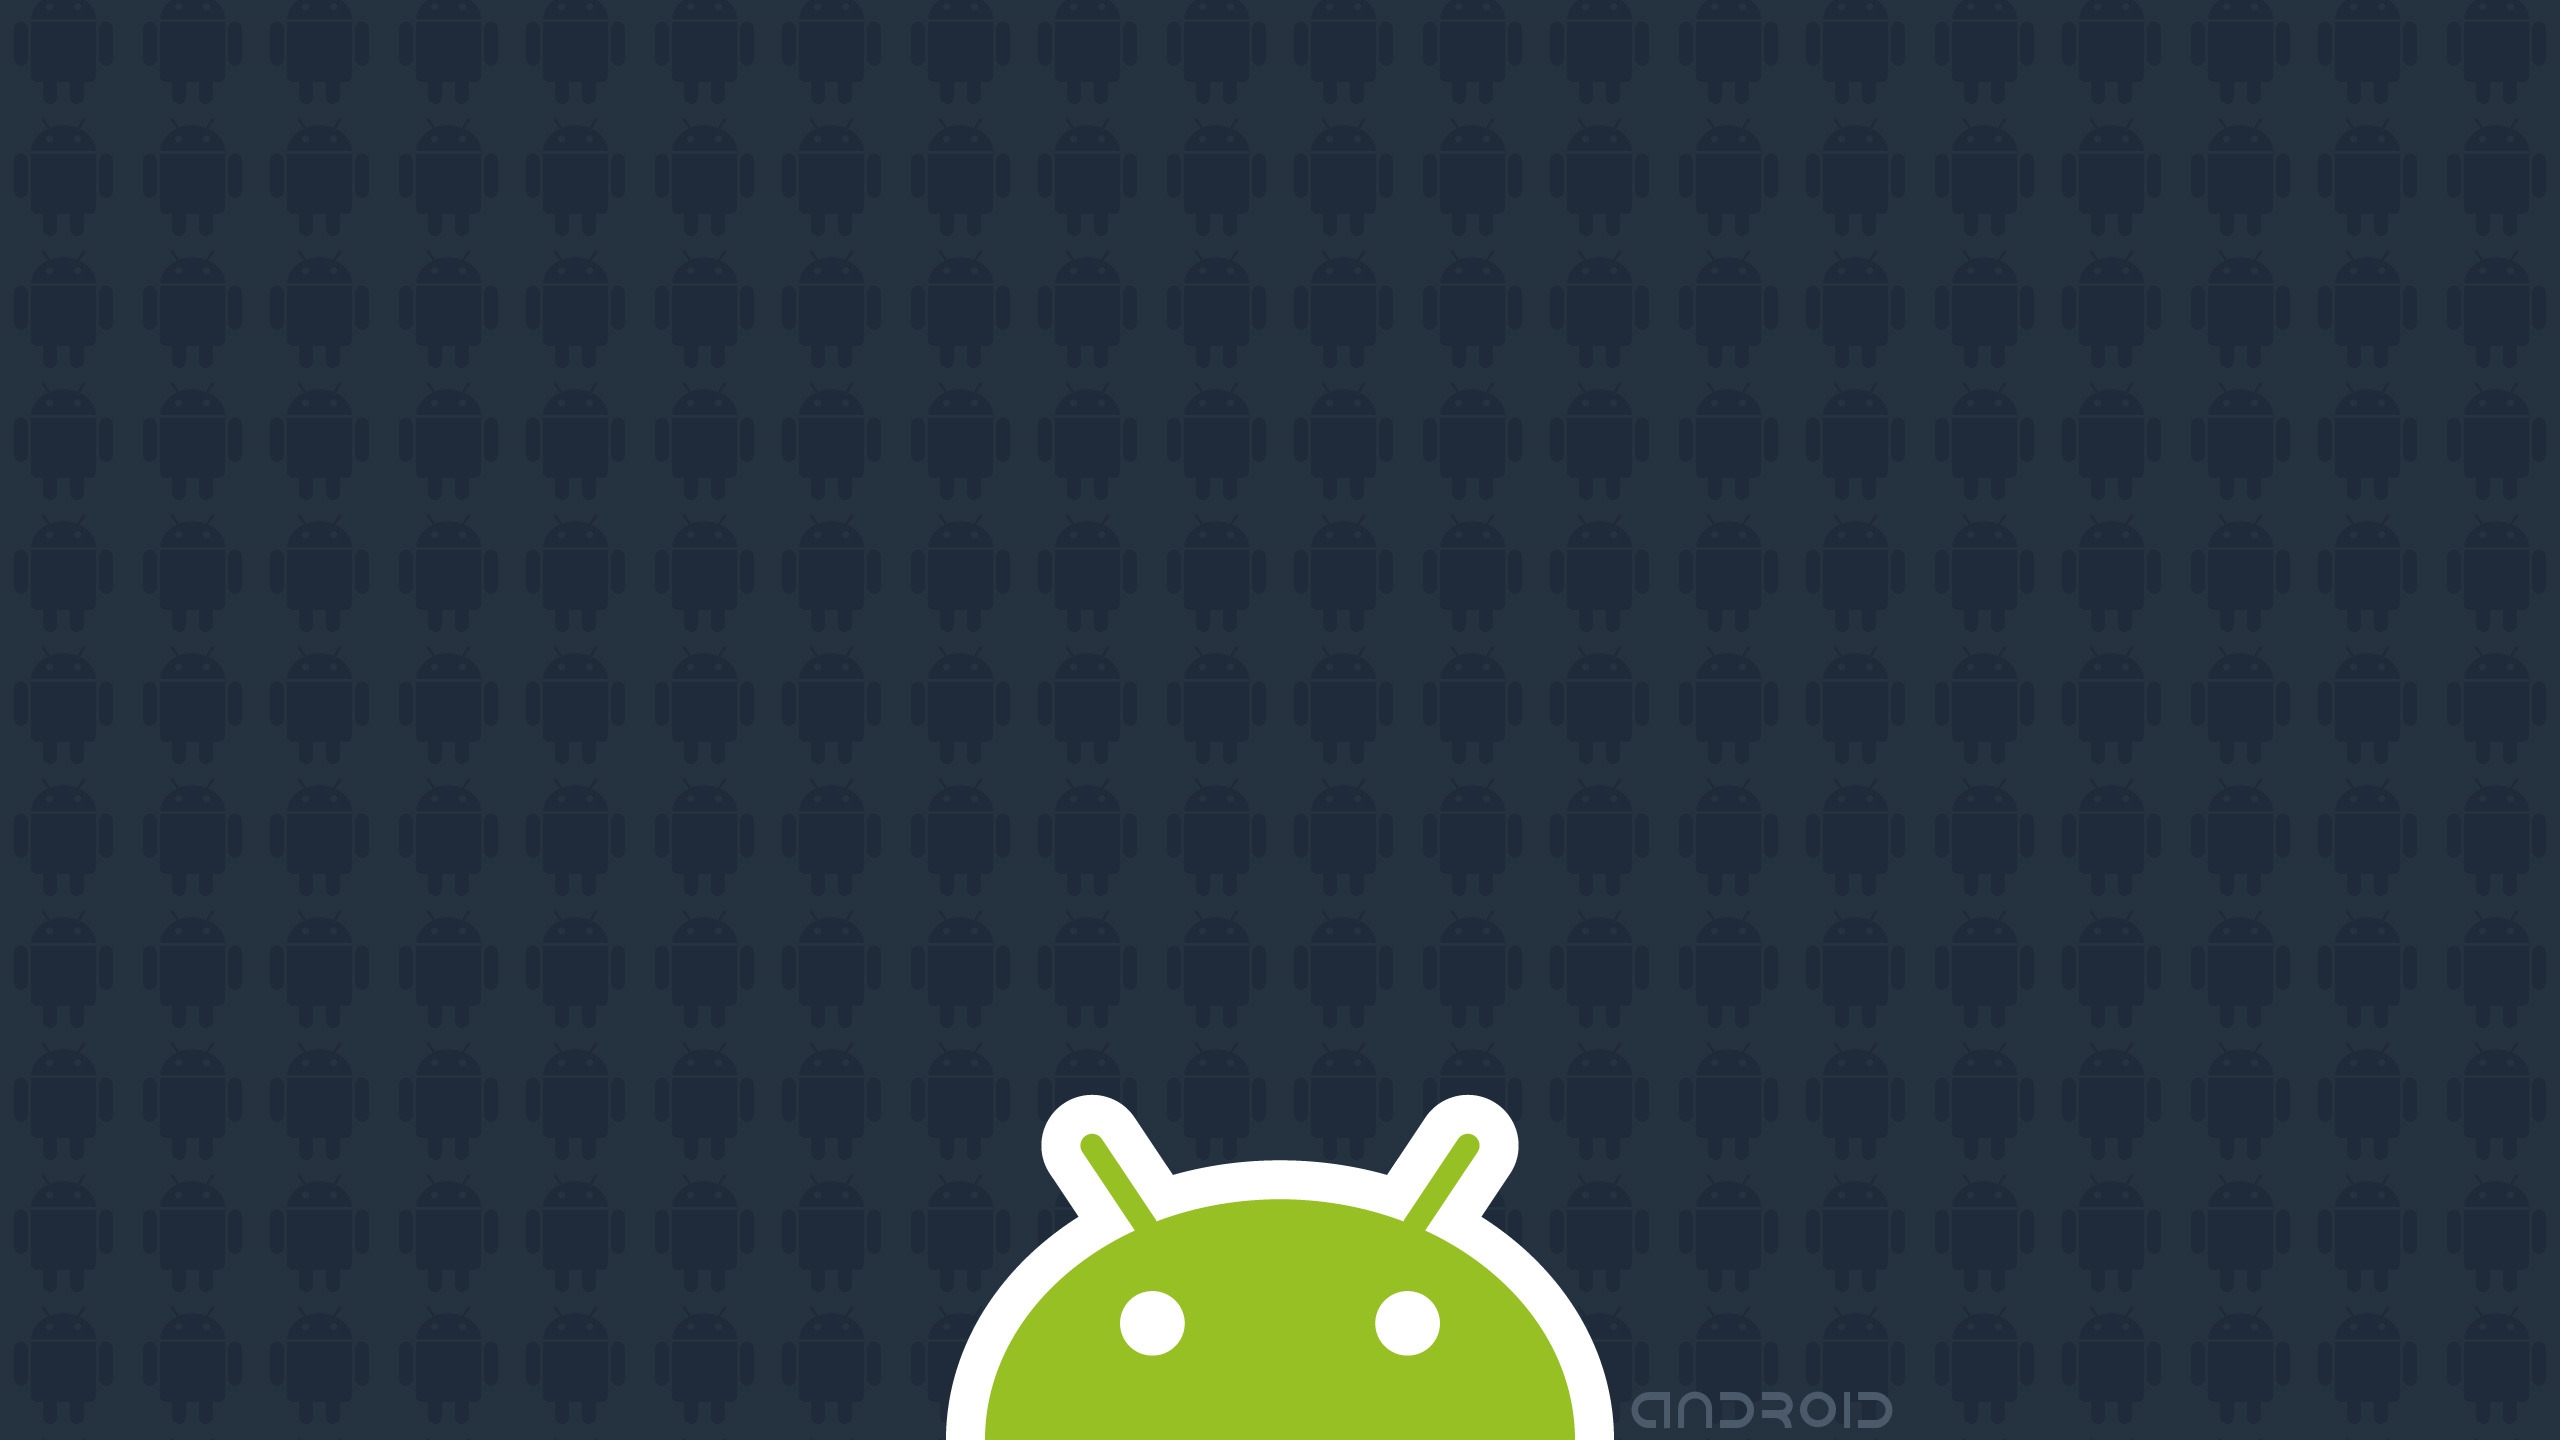 Android Pattern for 2560x1440 HDTV resolution